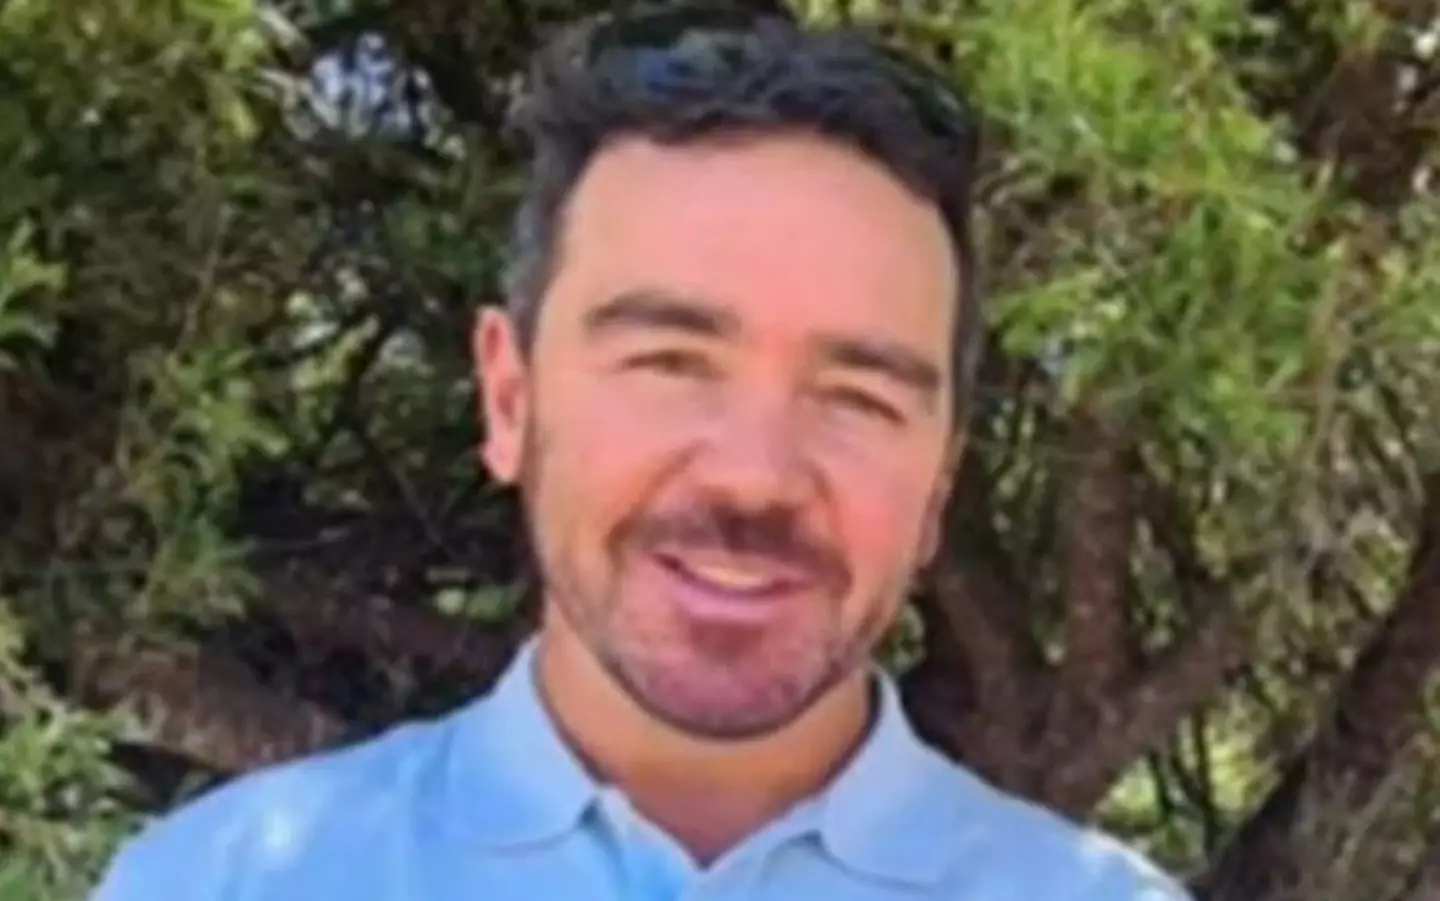 46-year-old teacher Simon Baccanello is believed to have died after a shark attack with only his board and part of his wetsuit found.